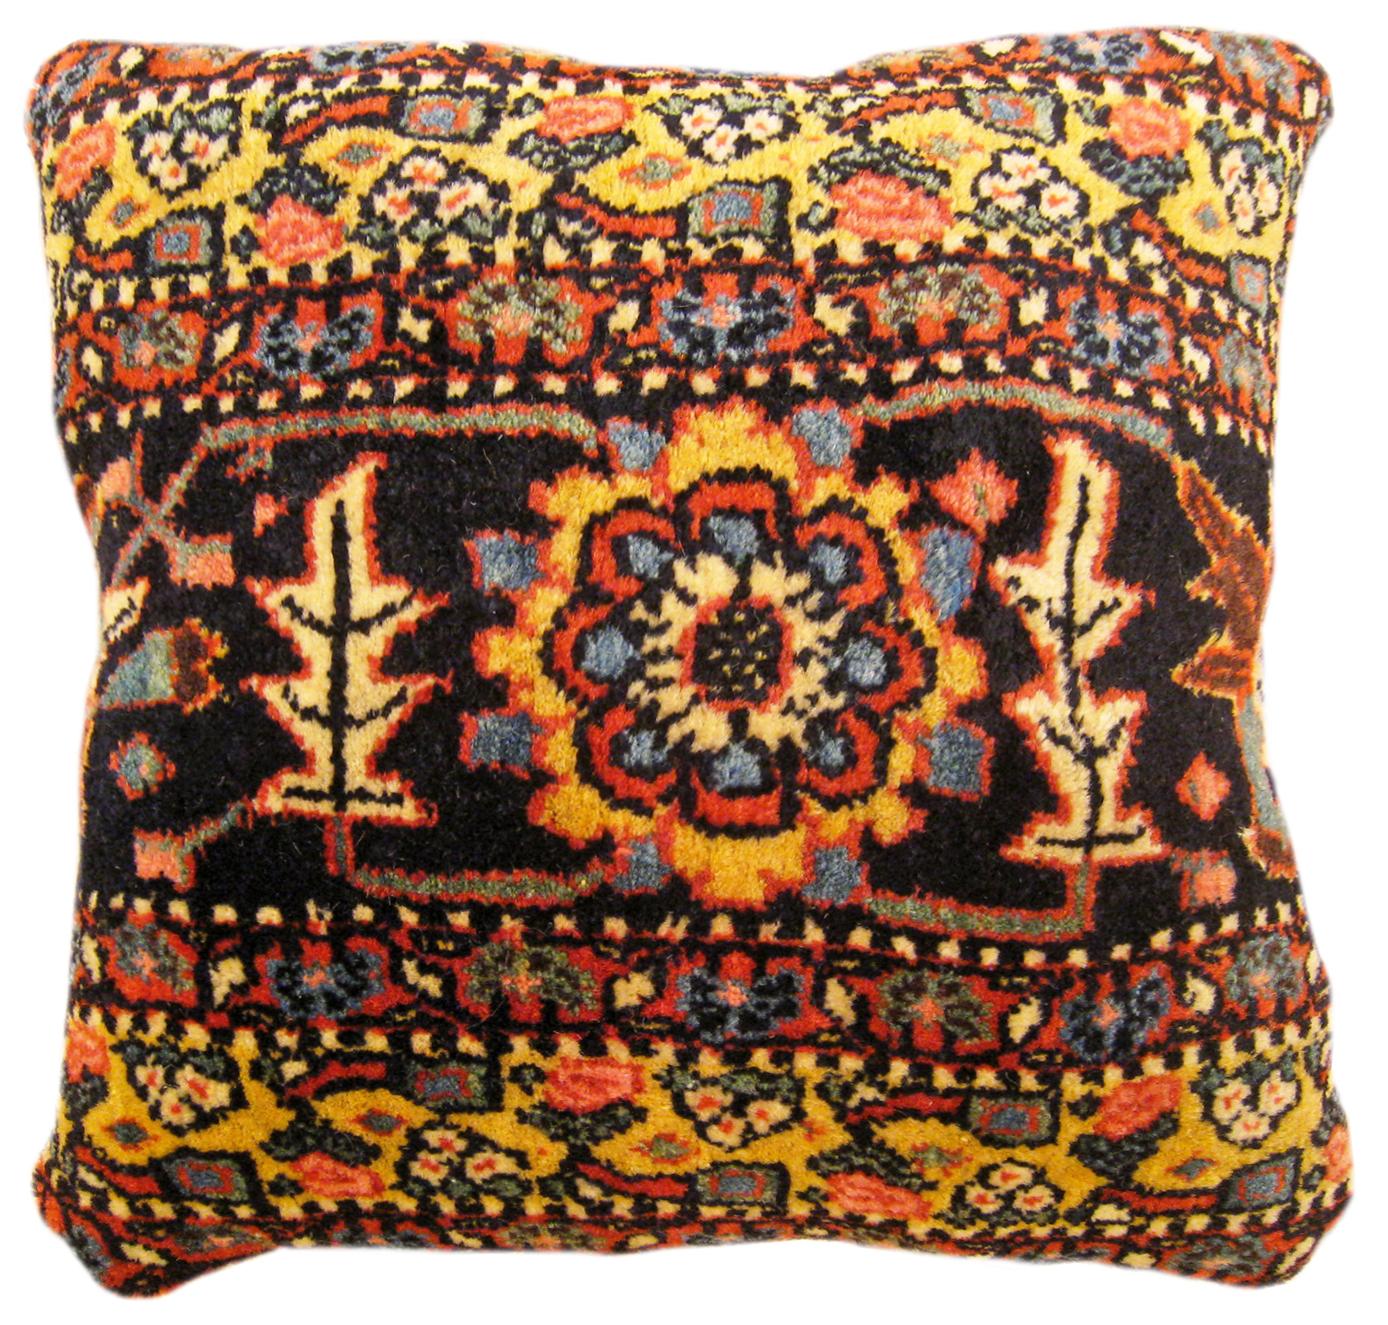 Early 20th Century Pair of Decorative Antique Persian Bidjar Carpet Pillows with Floral Elements For Sale